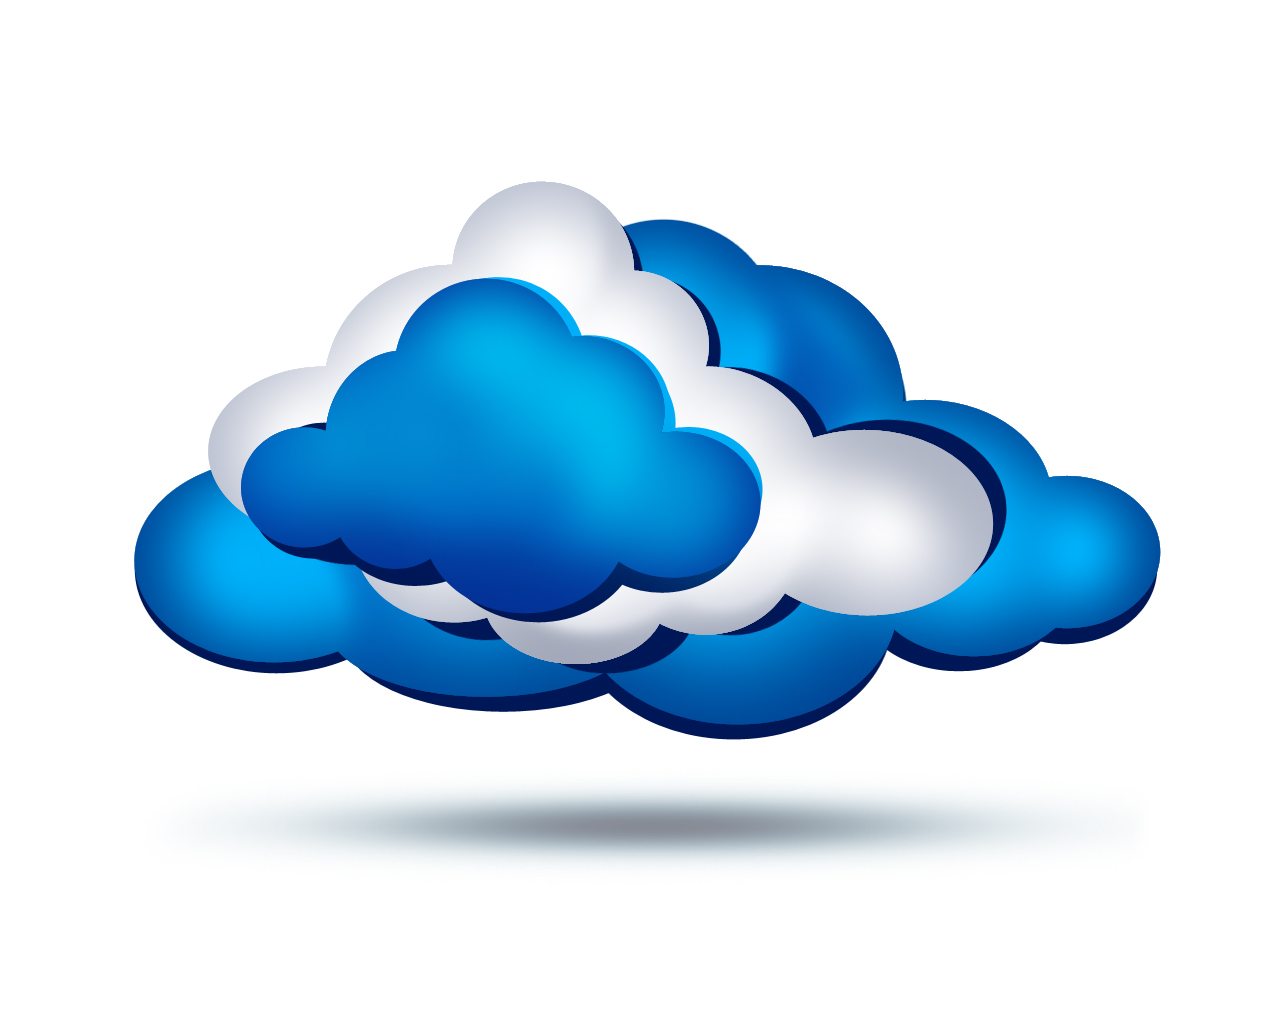 Cloud-on-Cloud Computing: An Expansion of Processing Power and Competition in the Cloud Market